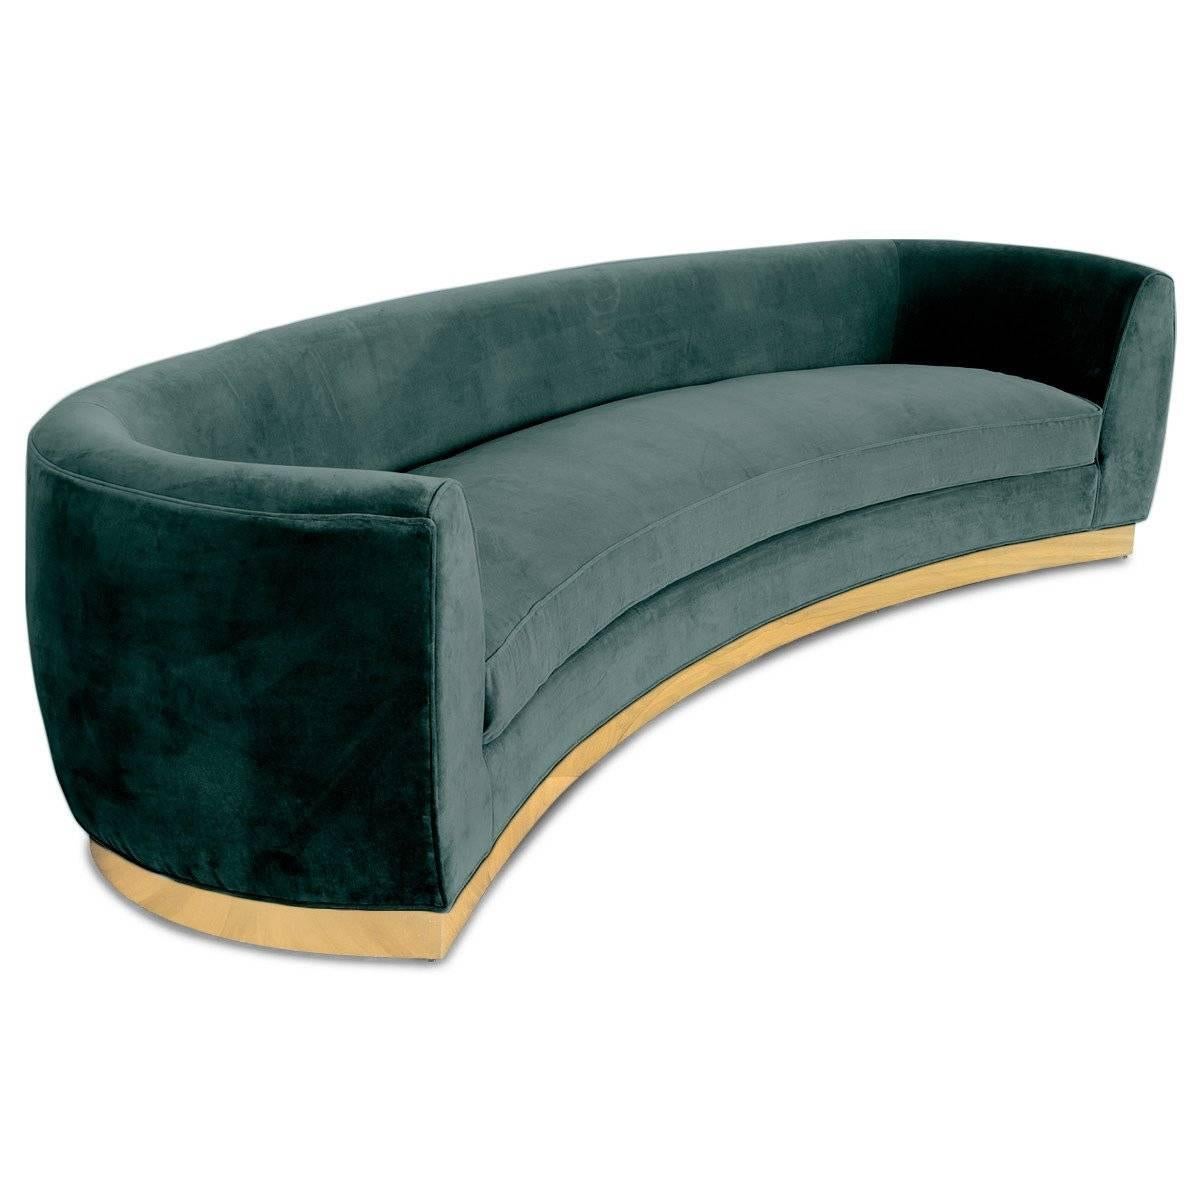 Art Deco Style Curved Sofa in Velvet Upholstery with Brass Toe-kick Base 10 foot For Sale 5